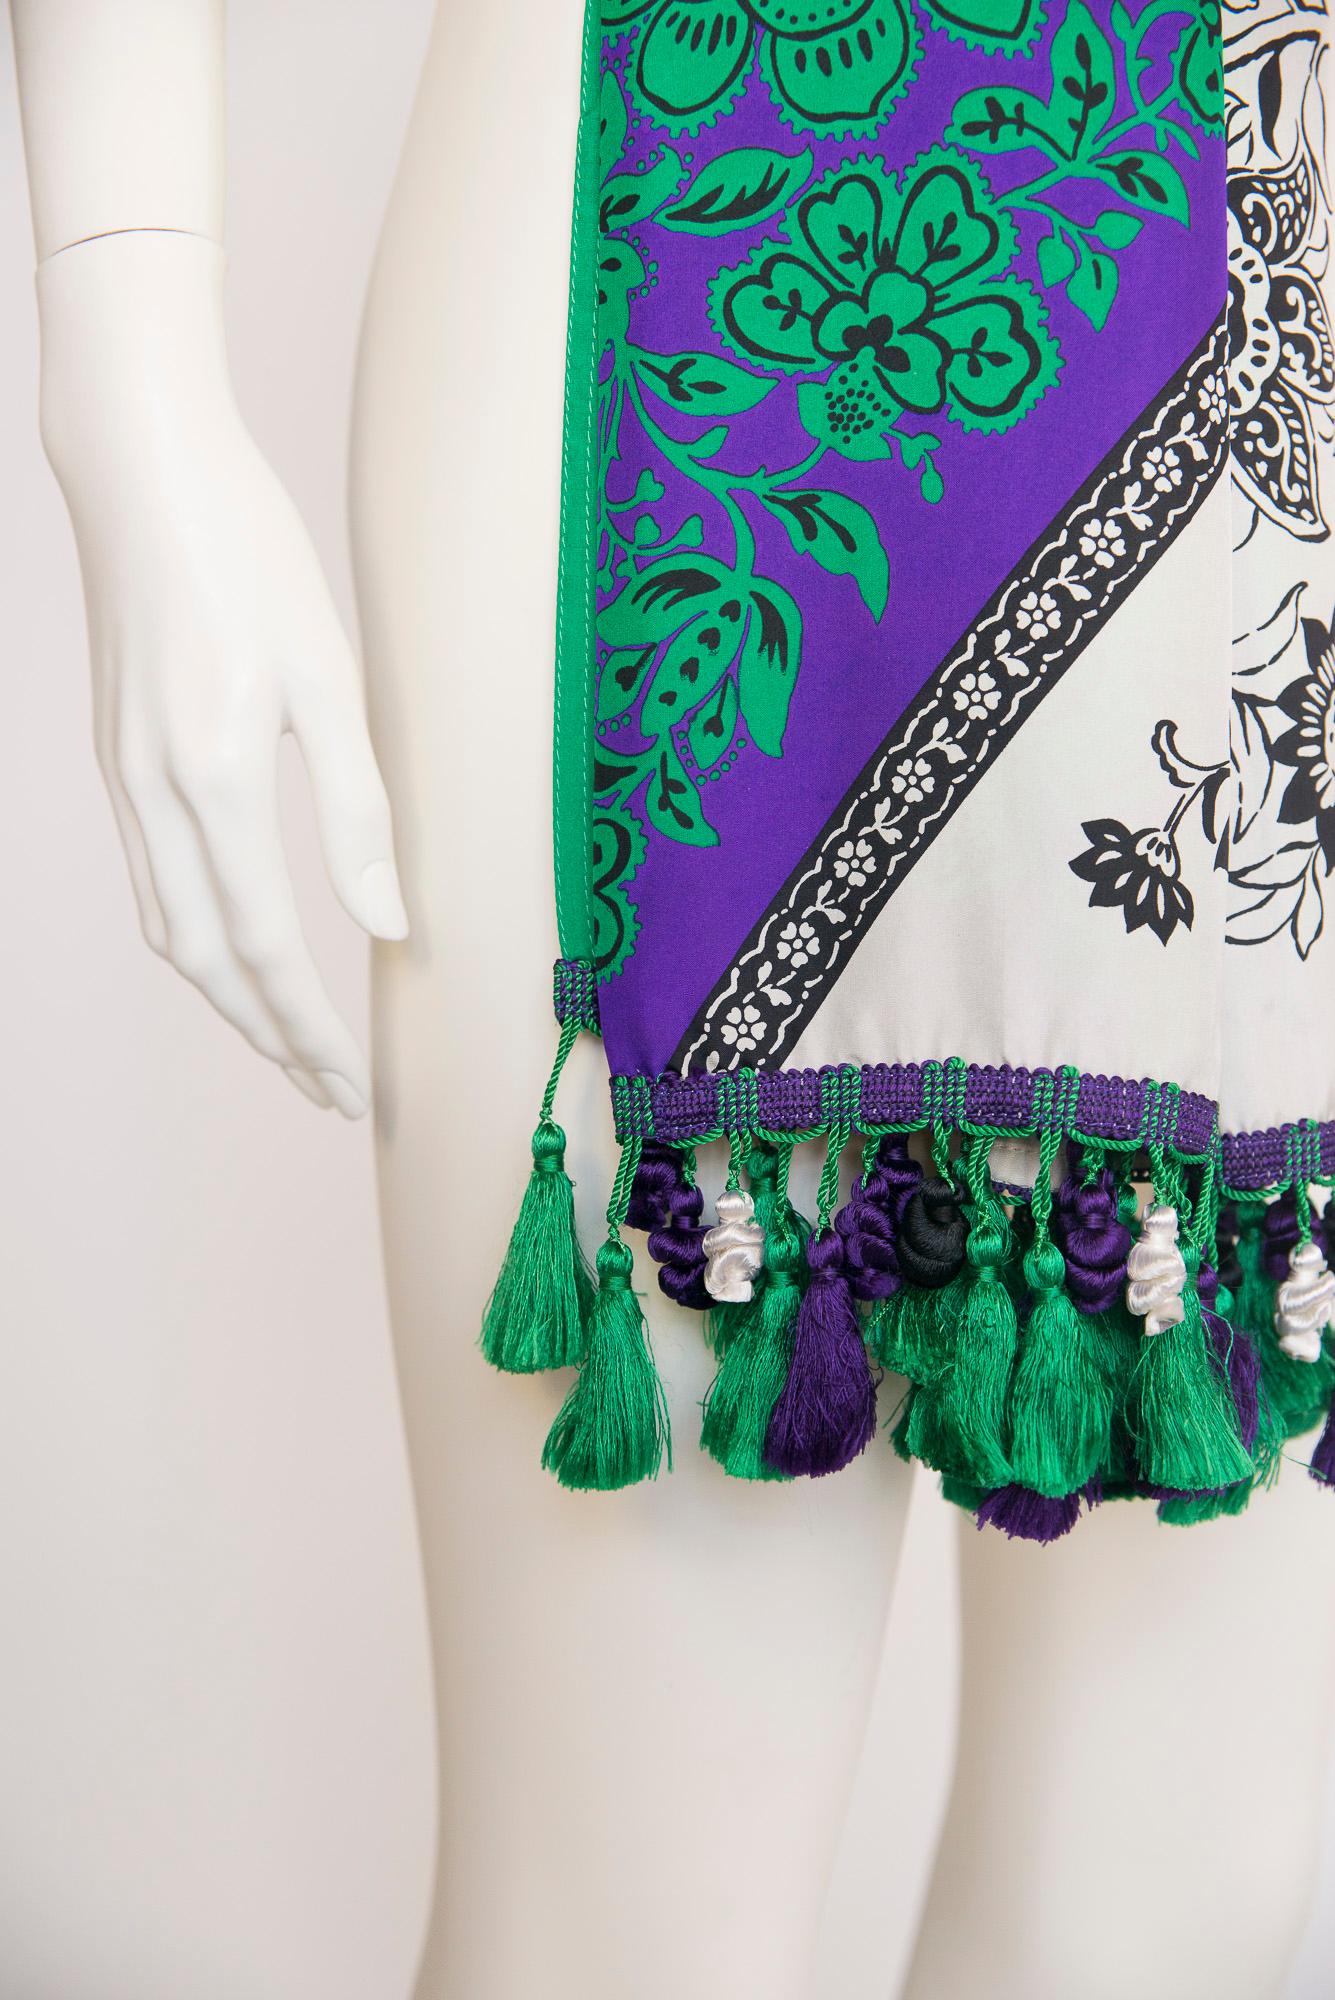 Rare Documented Gianni Versace Sera Fringed Giant Stole Shawl, SS 1988 For Sale 5